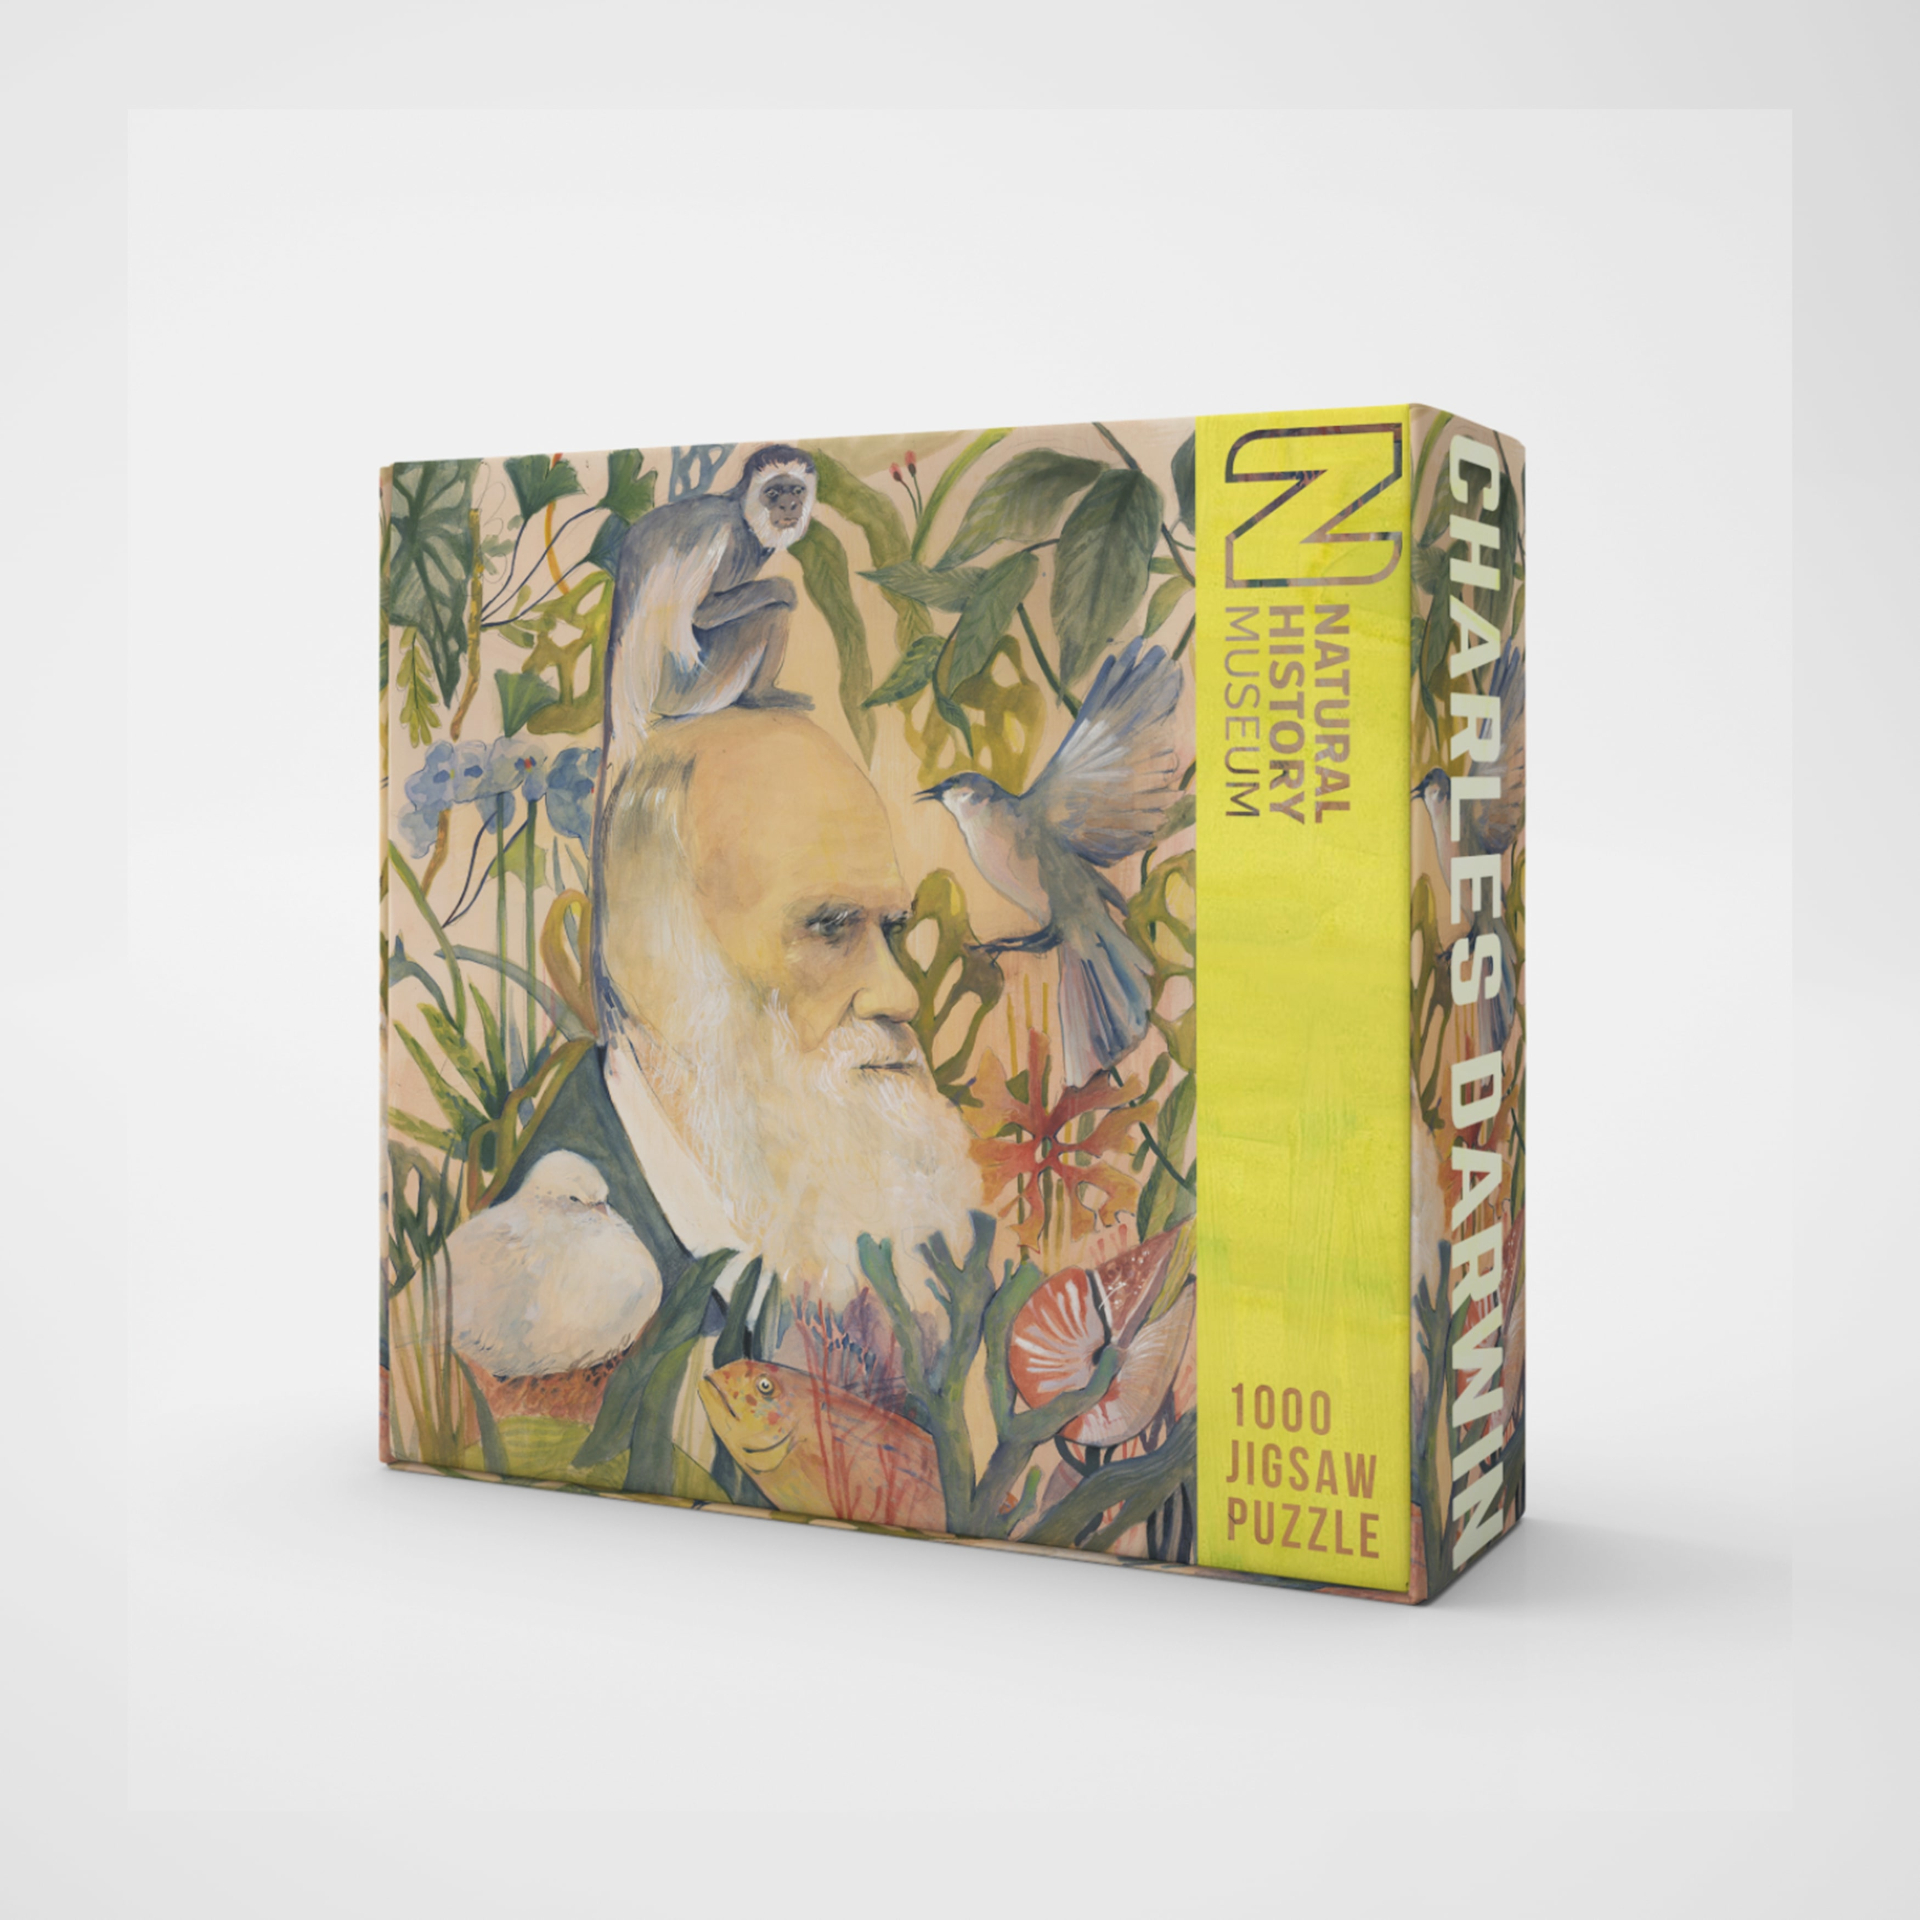 Darwin Puzzle Box. A gouache painting of Charles Darwin surrounded by plants and animals included in his research that I’ve turned into a jigsaw puzzle packaging.